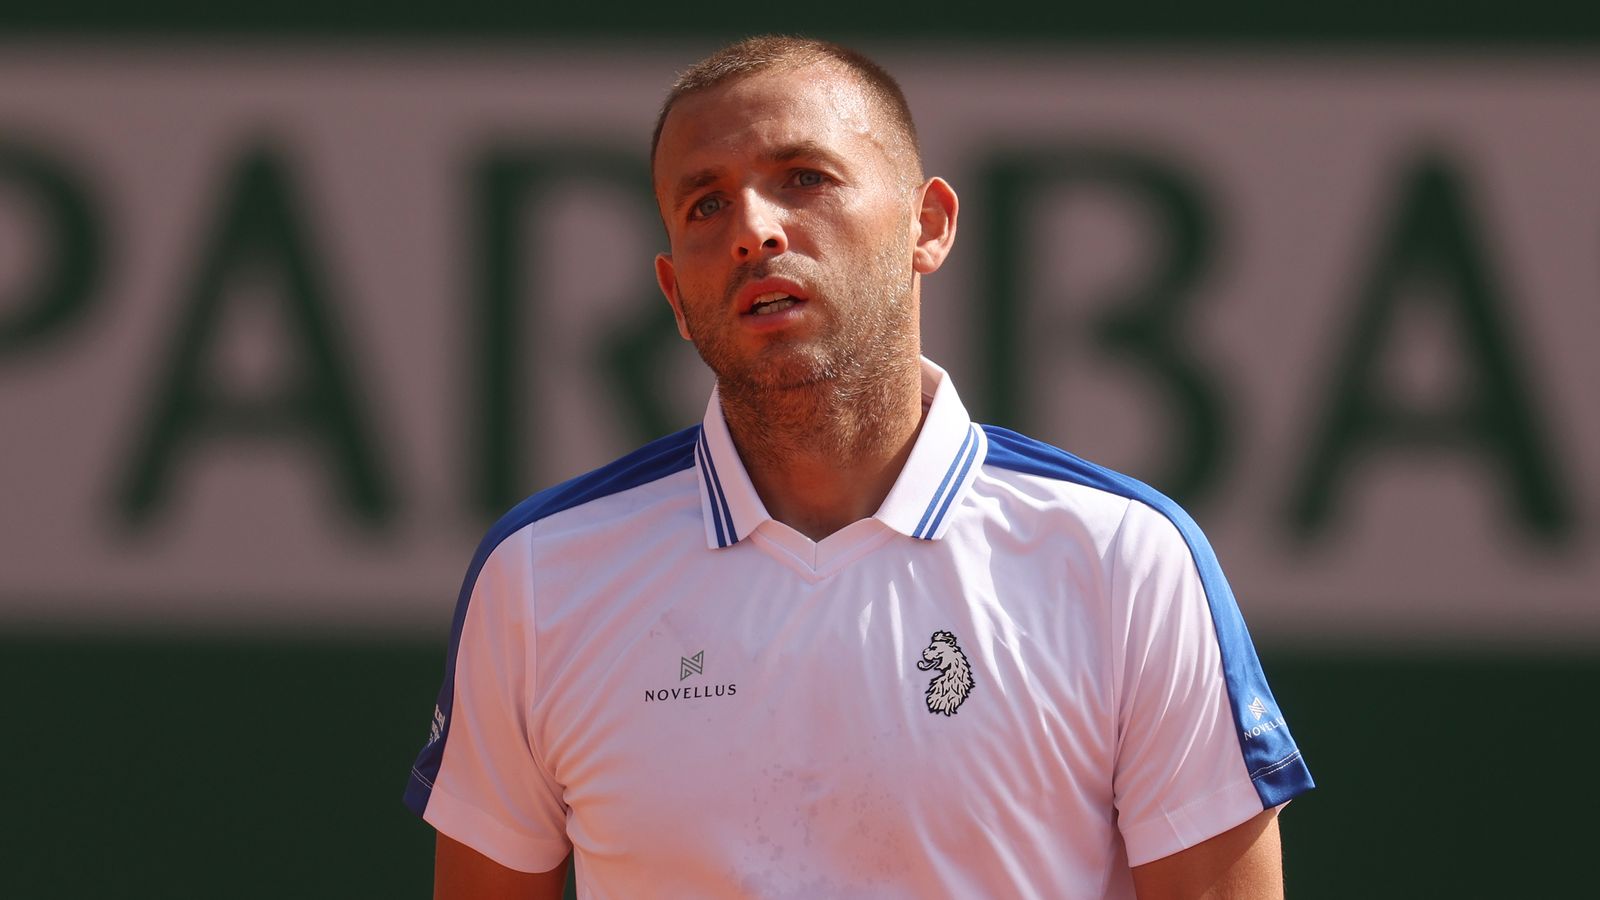 Monte Carlo Masters Dan Evans heading home early after firstround